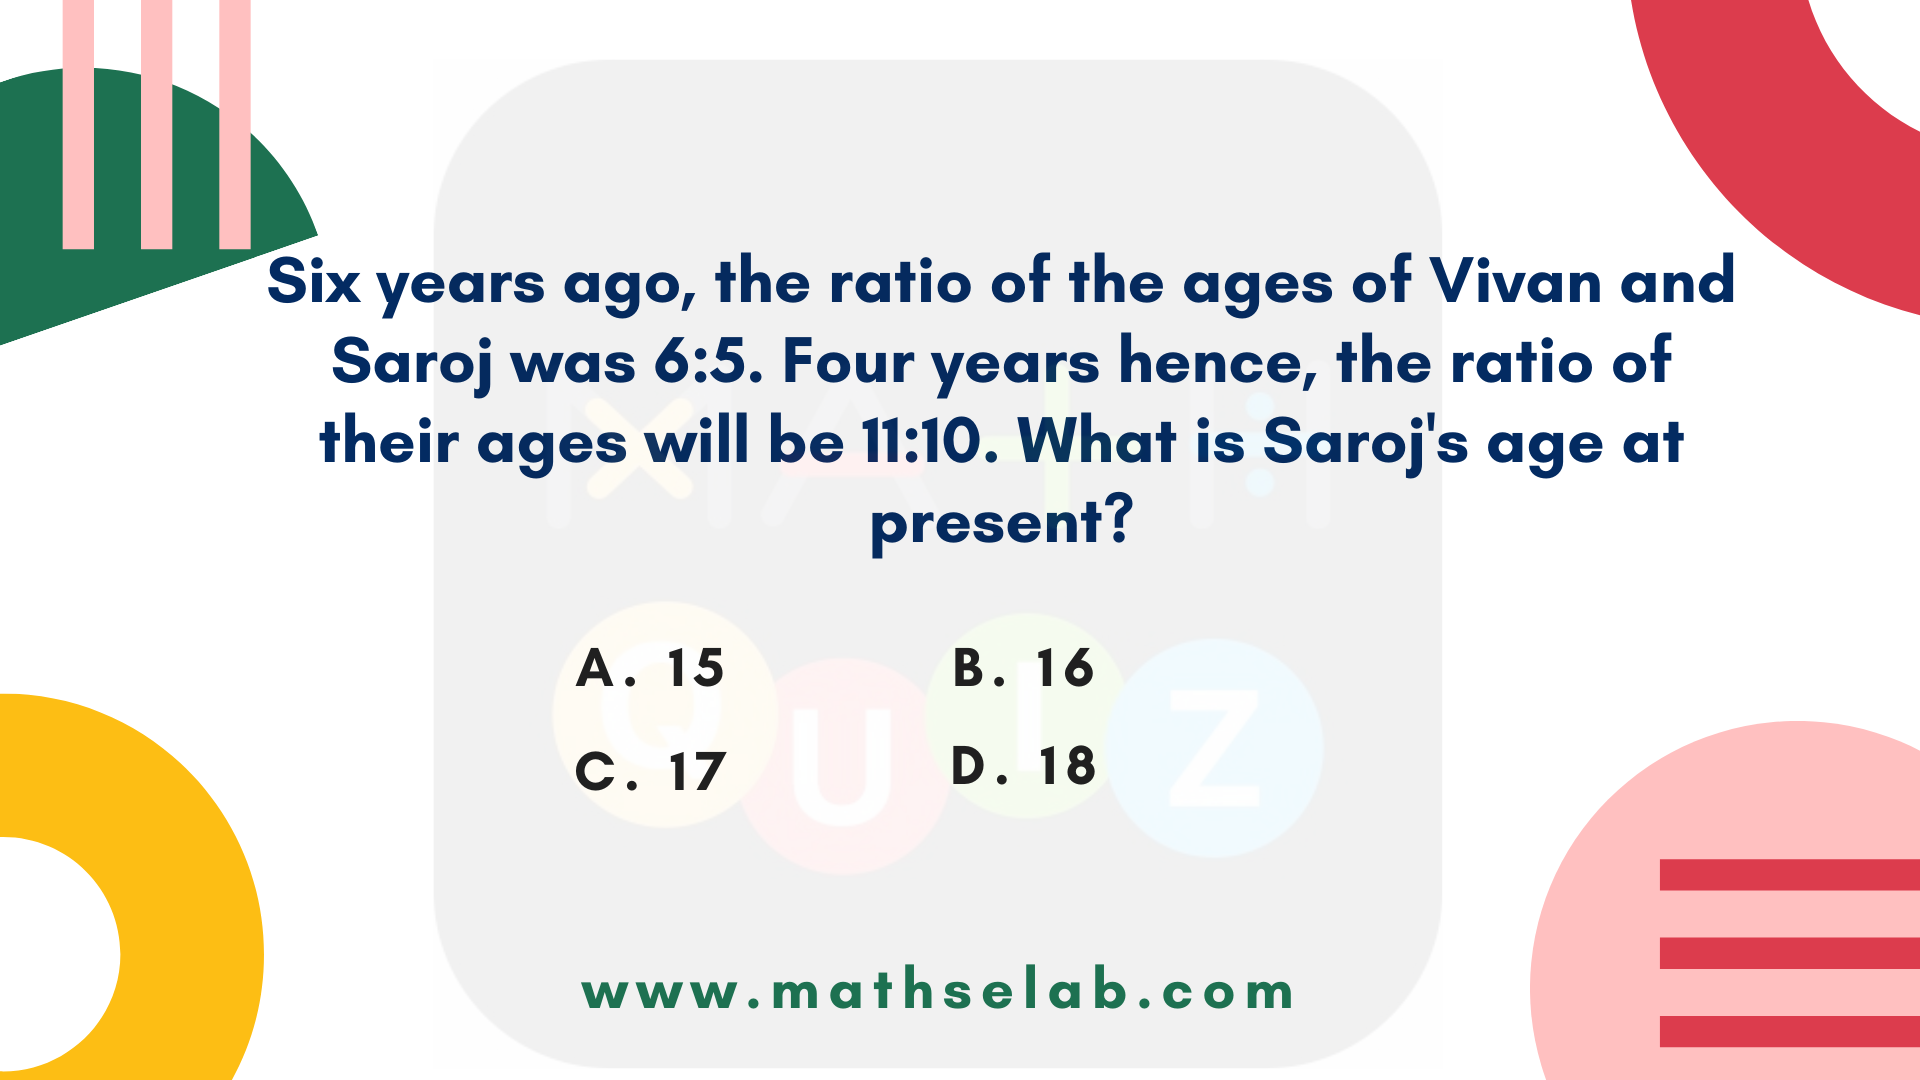 Six years ago, the ratio of the ages of Vivan and Saroj was 6:5. Four years hence, the ratio of their ages will be 11:10. What is Saroj's age at present?